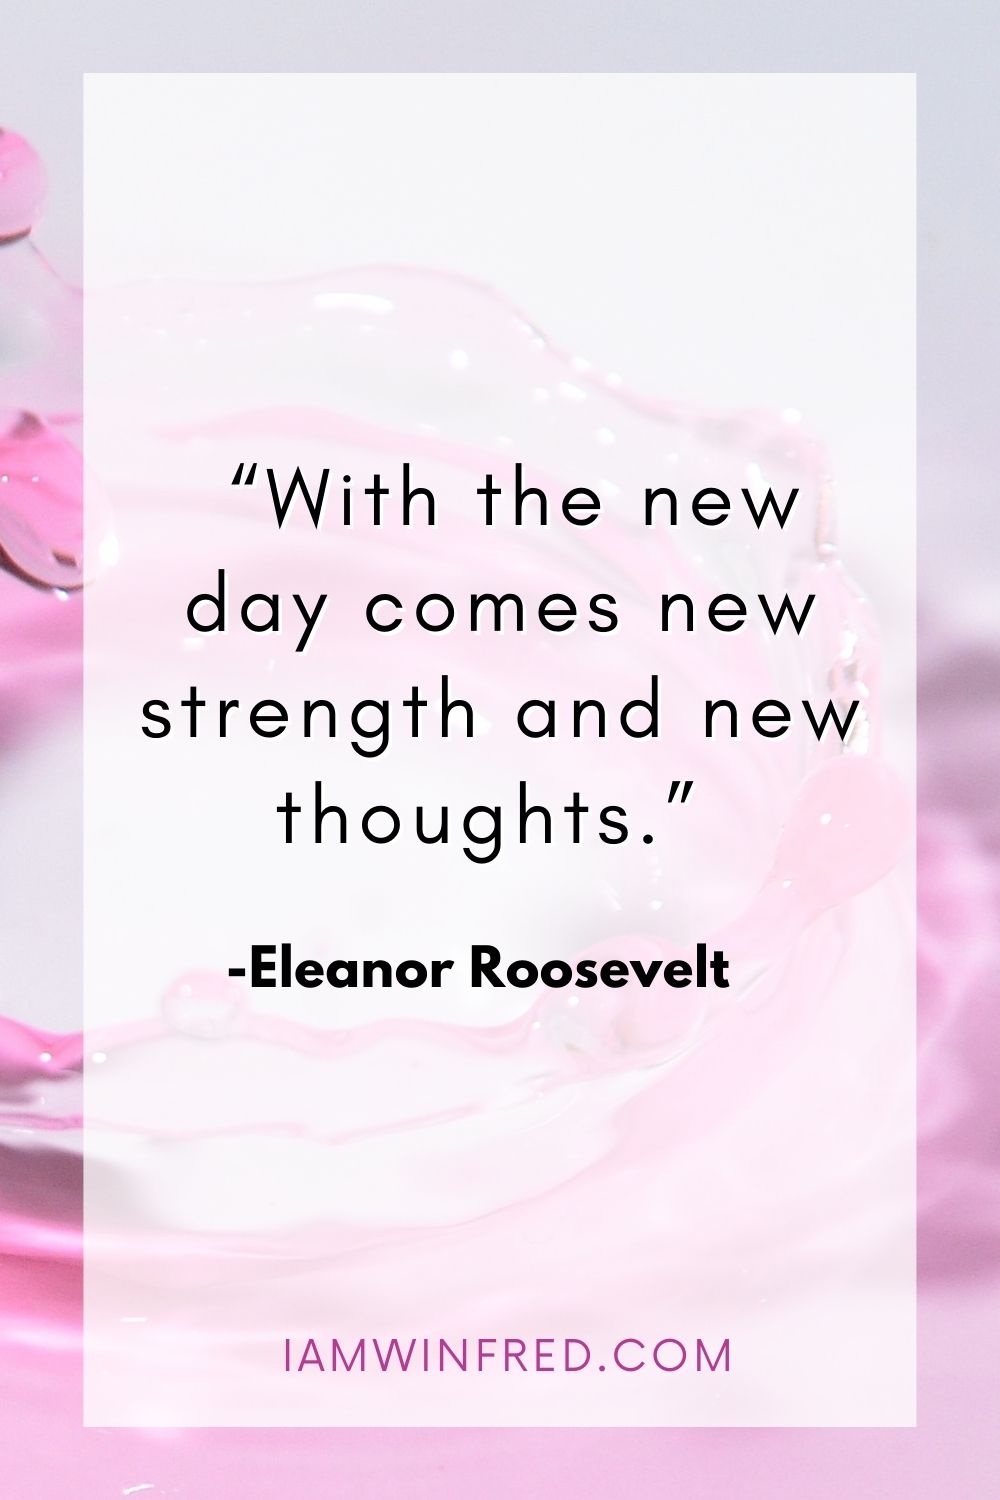 With The New Day Comes New Strength And New Thoughts.